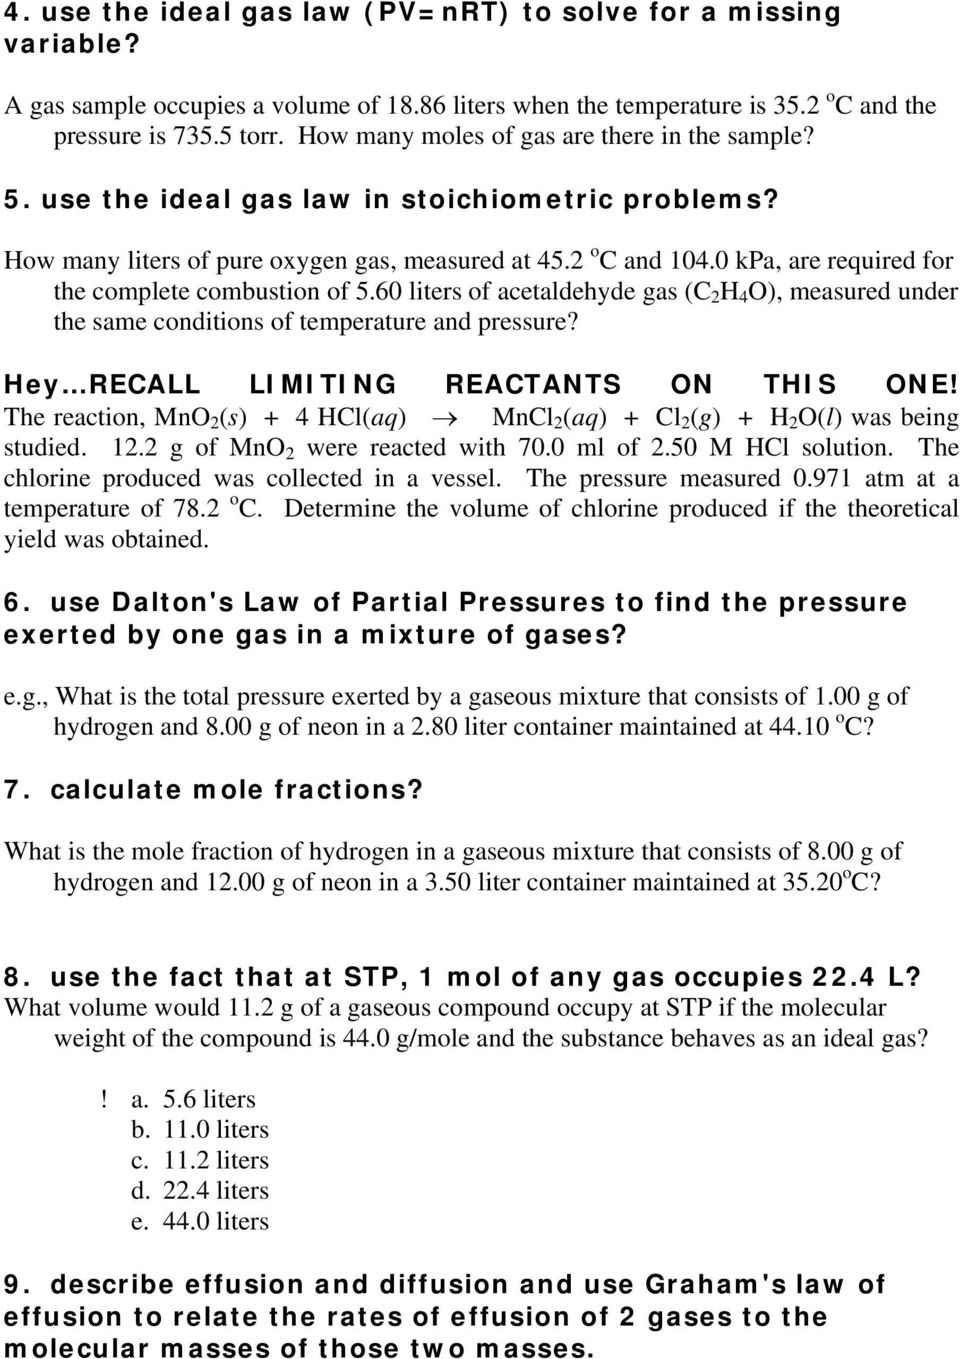 0 kpa, are required for the complete combustion of 5.60 liters of acetaldehyde gas (C 2 H 4 O), measured under the same conditions of temperature and pressure?